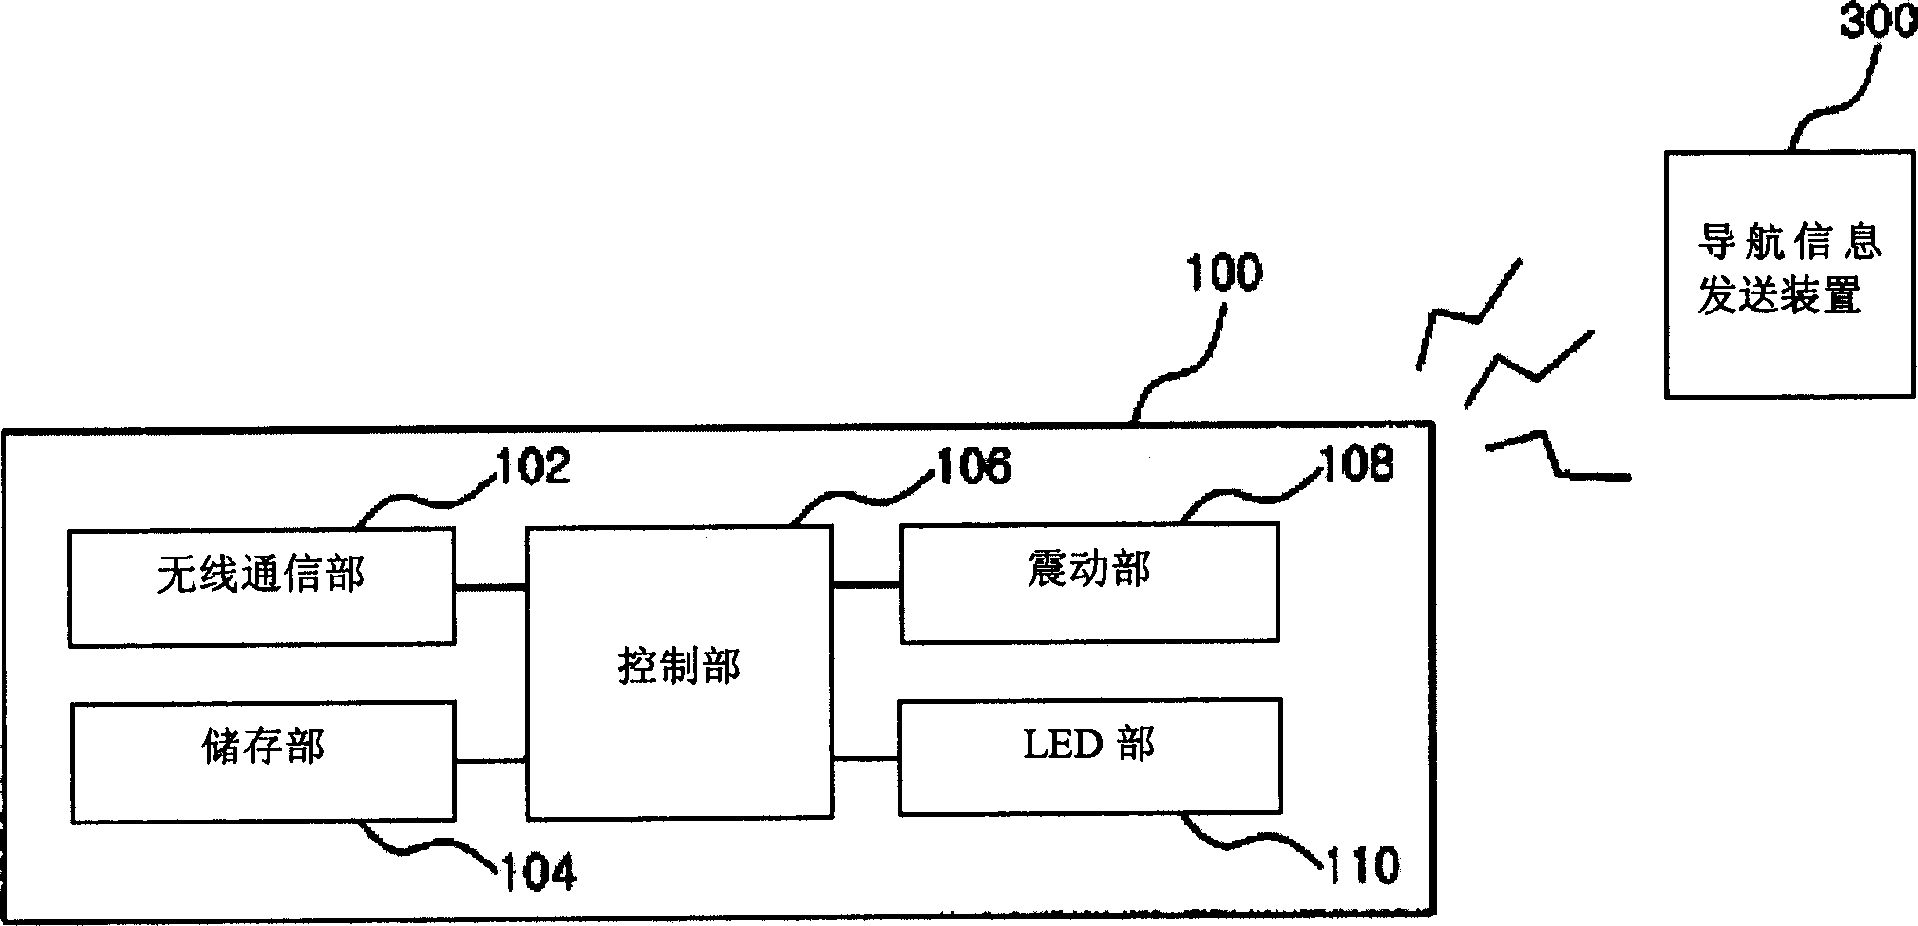 Information navigation apparatus and method by using american morse code